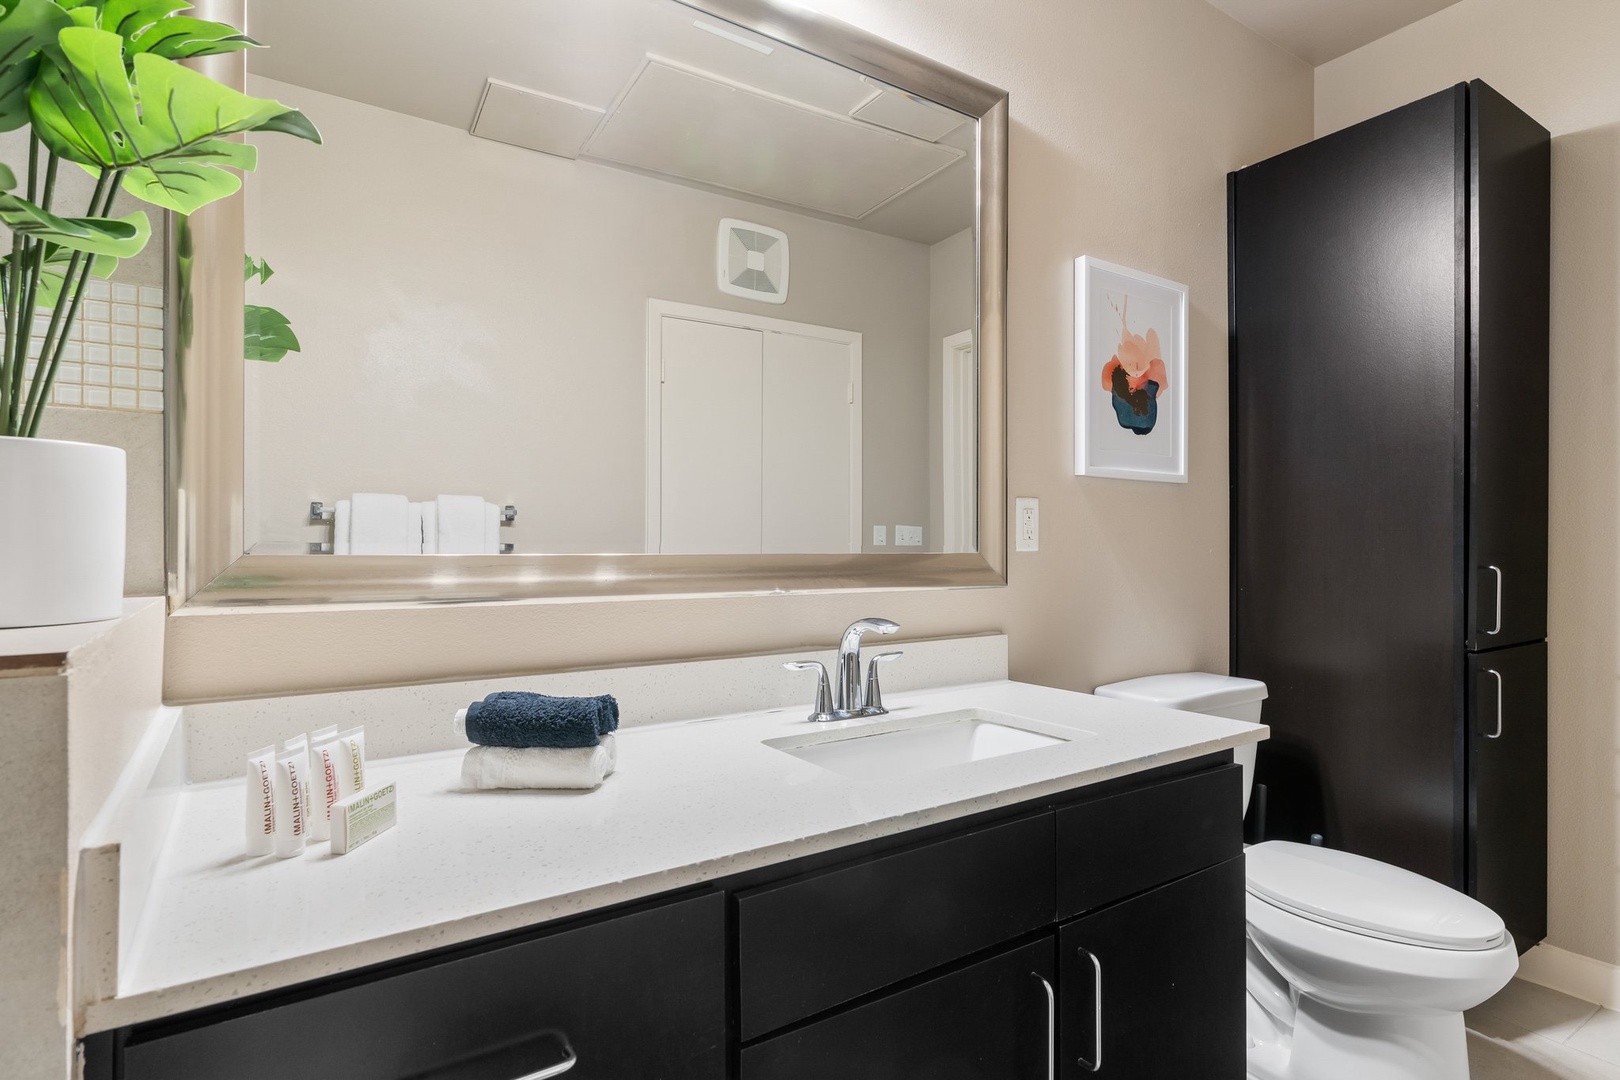 Start your morning refreshed in the stylish bathroom with complimentary toiletries.